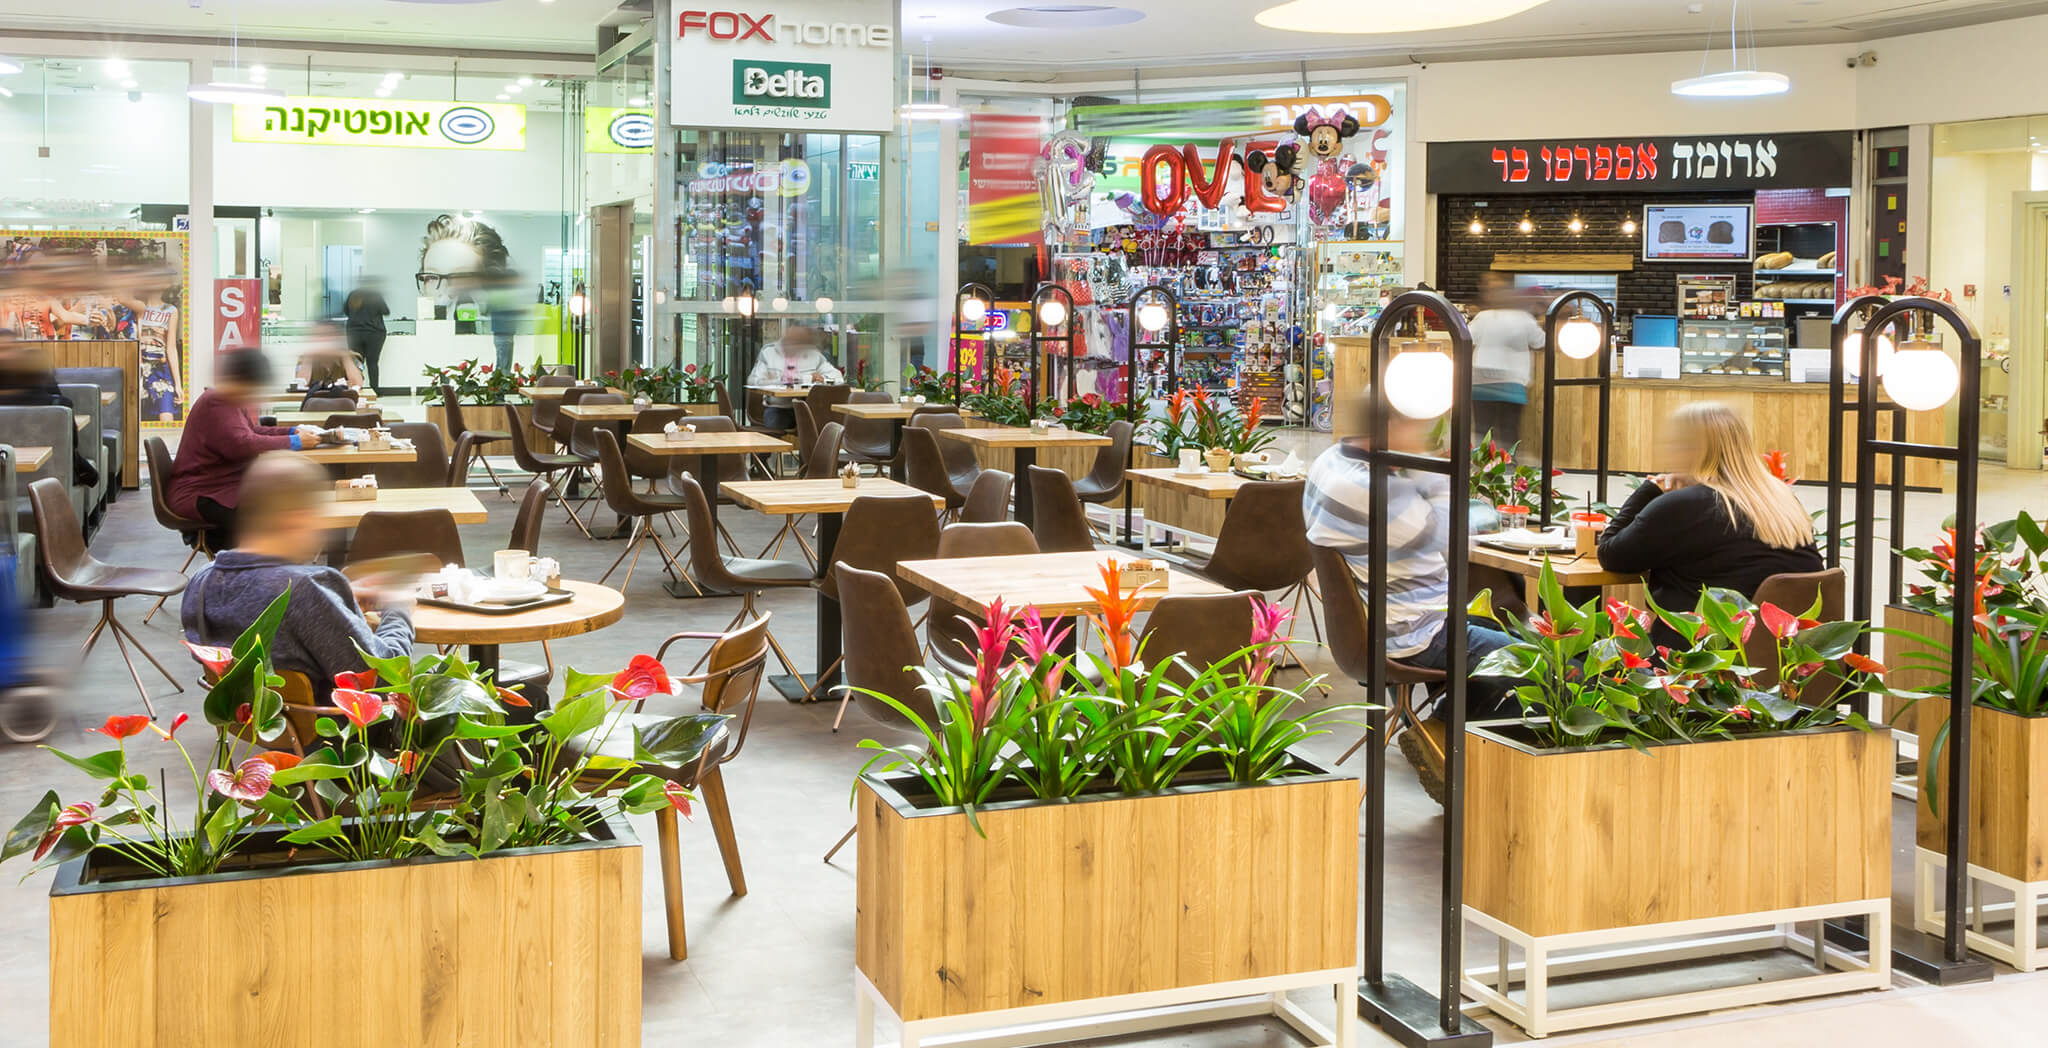 Negev Mall branch seating area